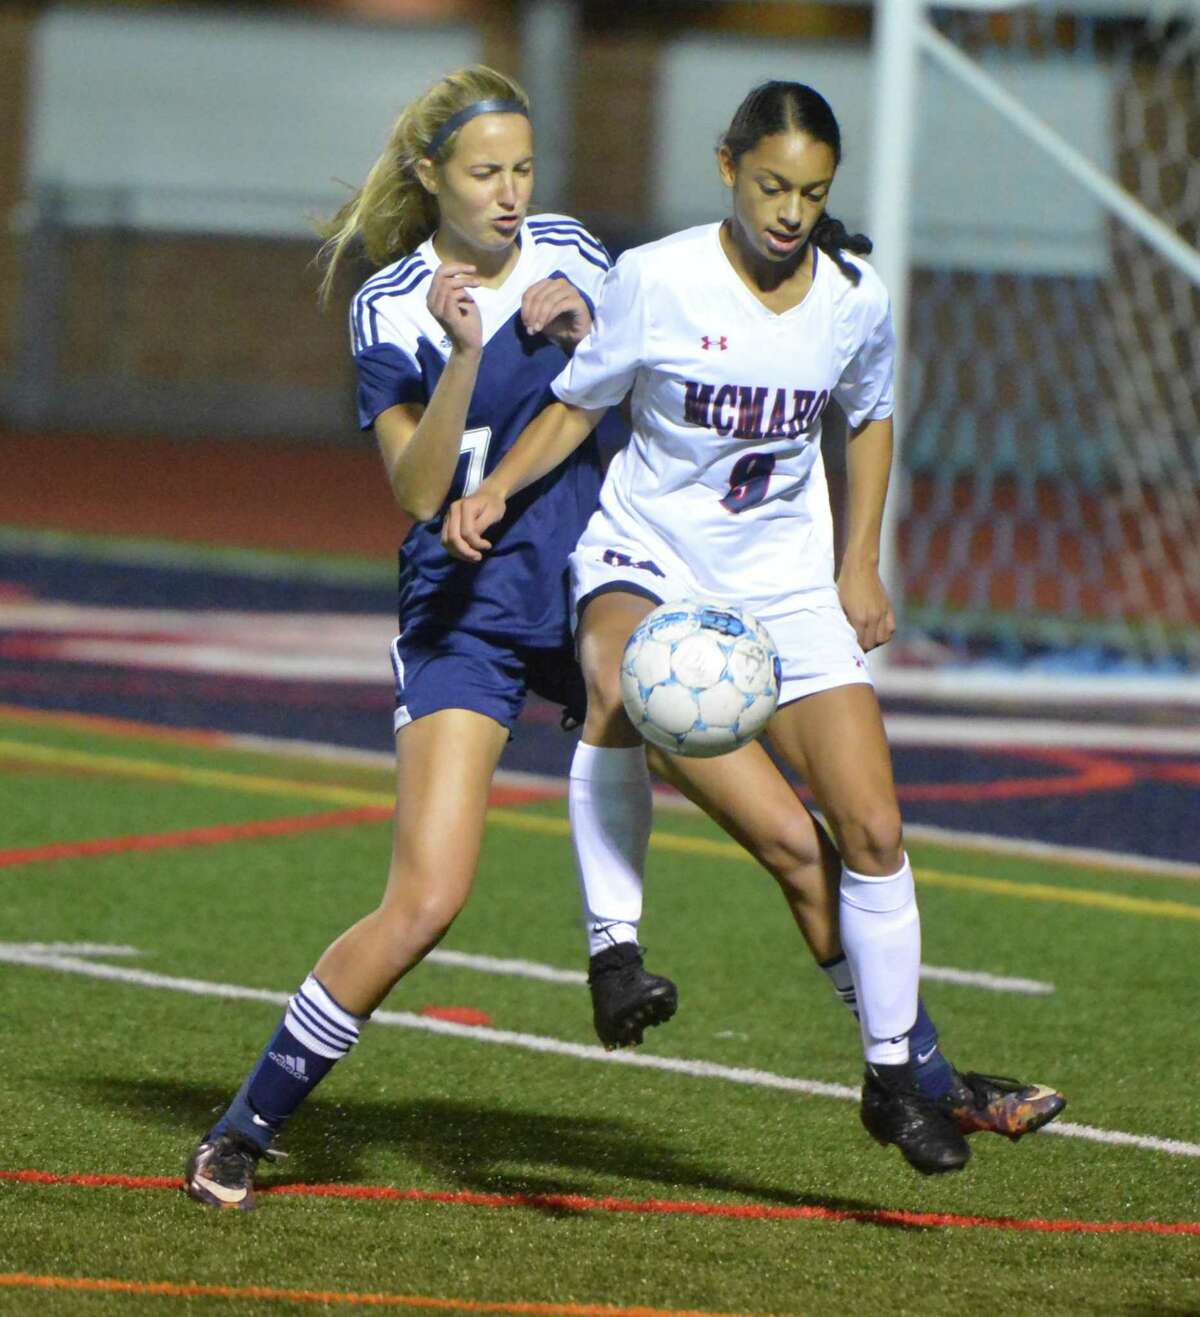 Brien McMahon's #9 Peyton McNamara gets the ball around a Wilton defender during girls soccer action vs. Wilton High School on Tuesday October 17, 2017 at Brien McMahon High School in Norwalk Conn.